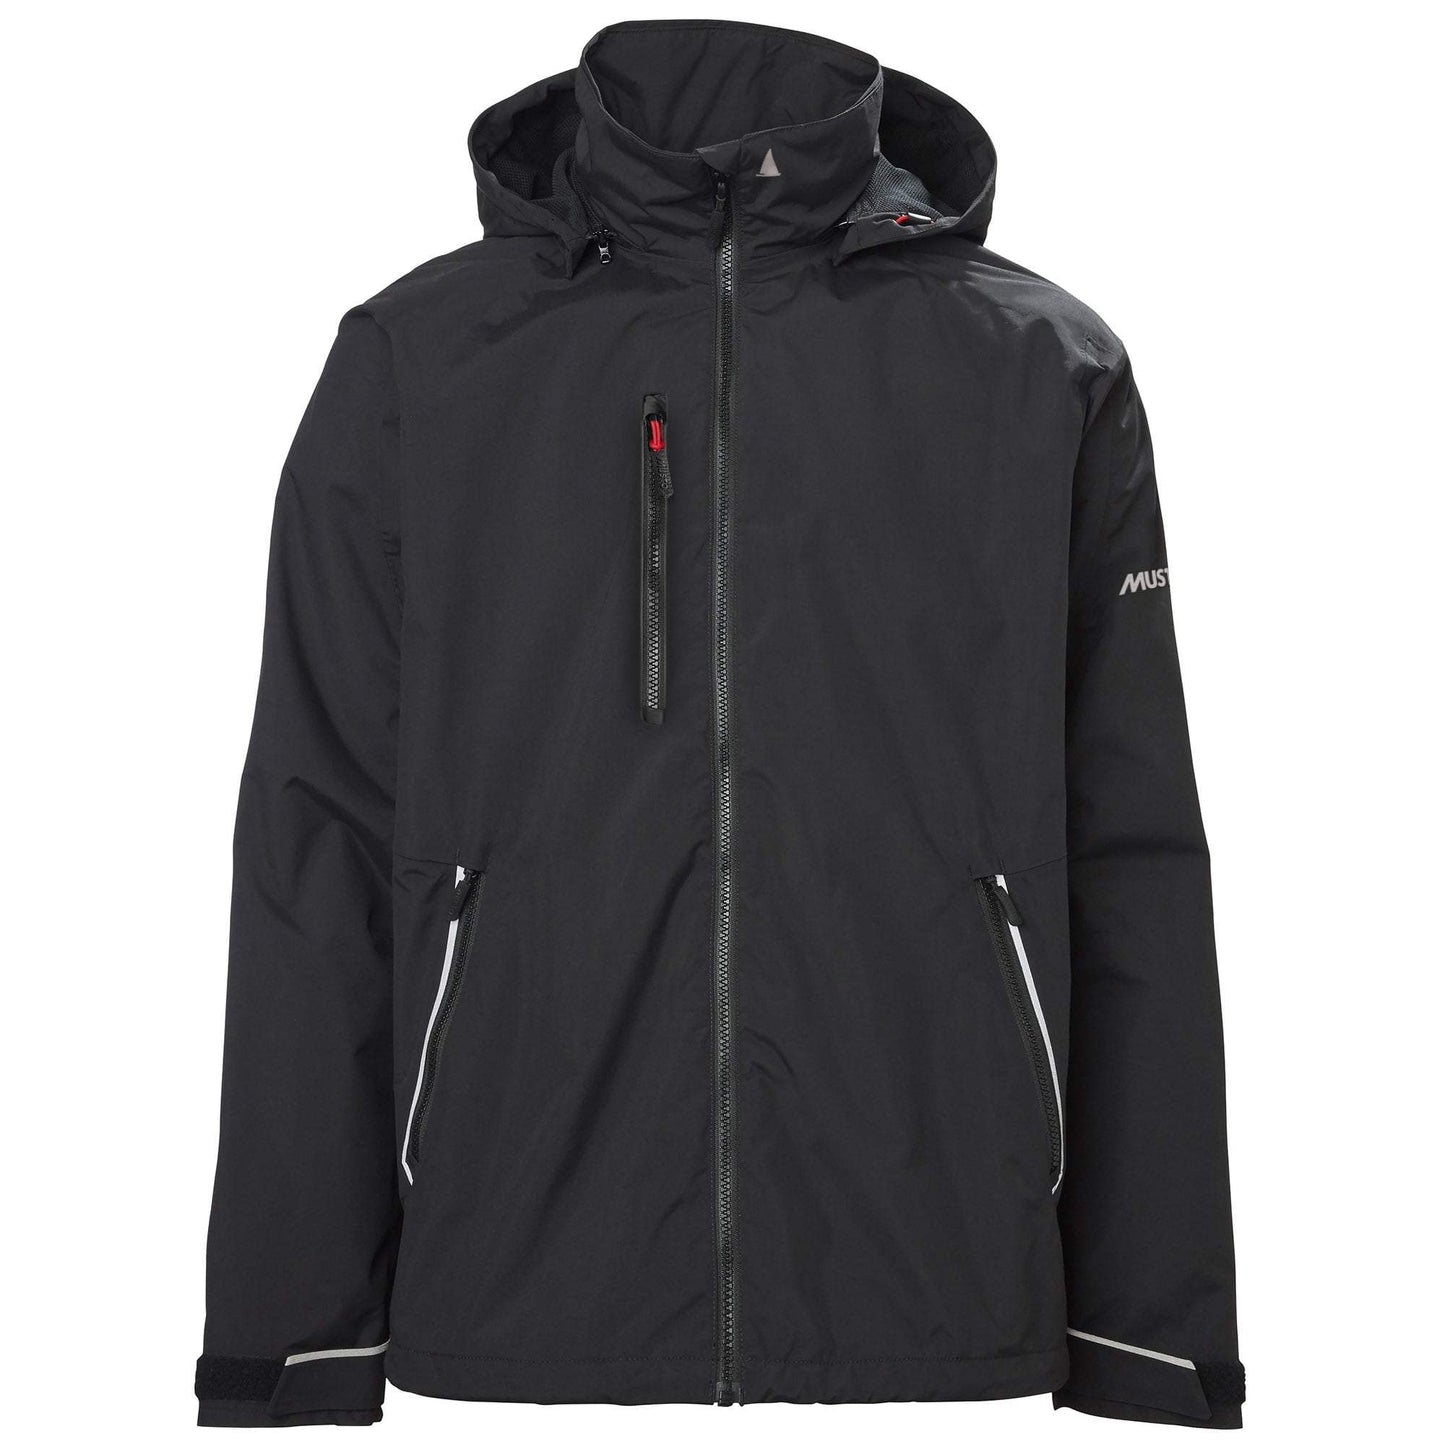 Corsica 2.0 Jacket by Musto - The Luxury Promotional Gifts Company Limited